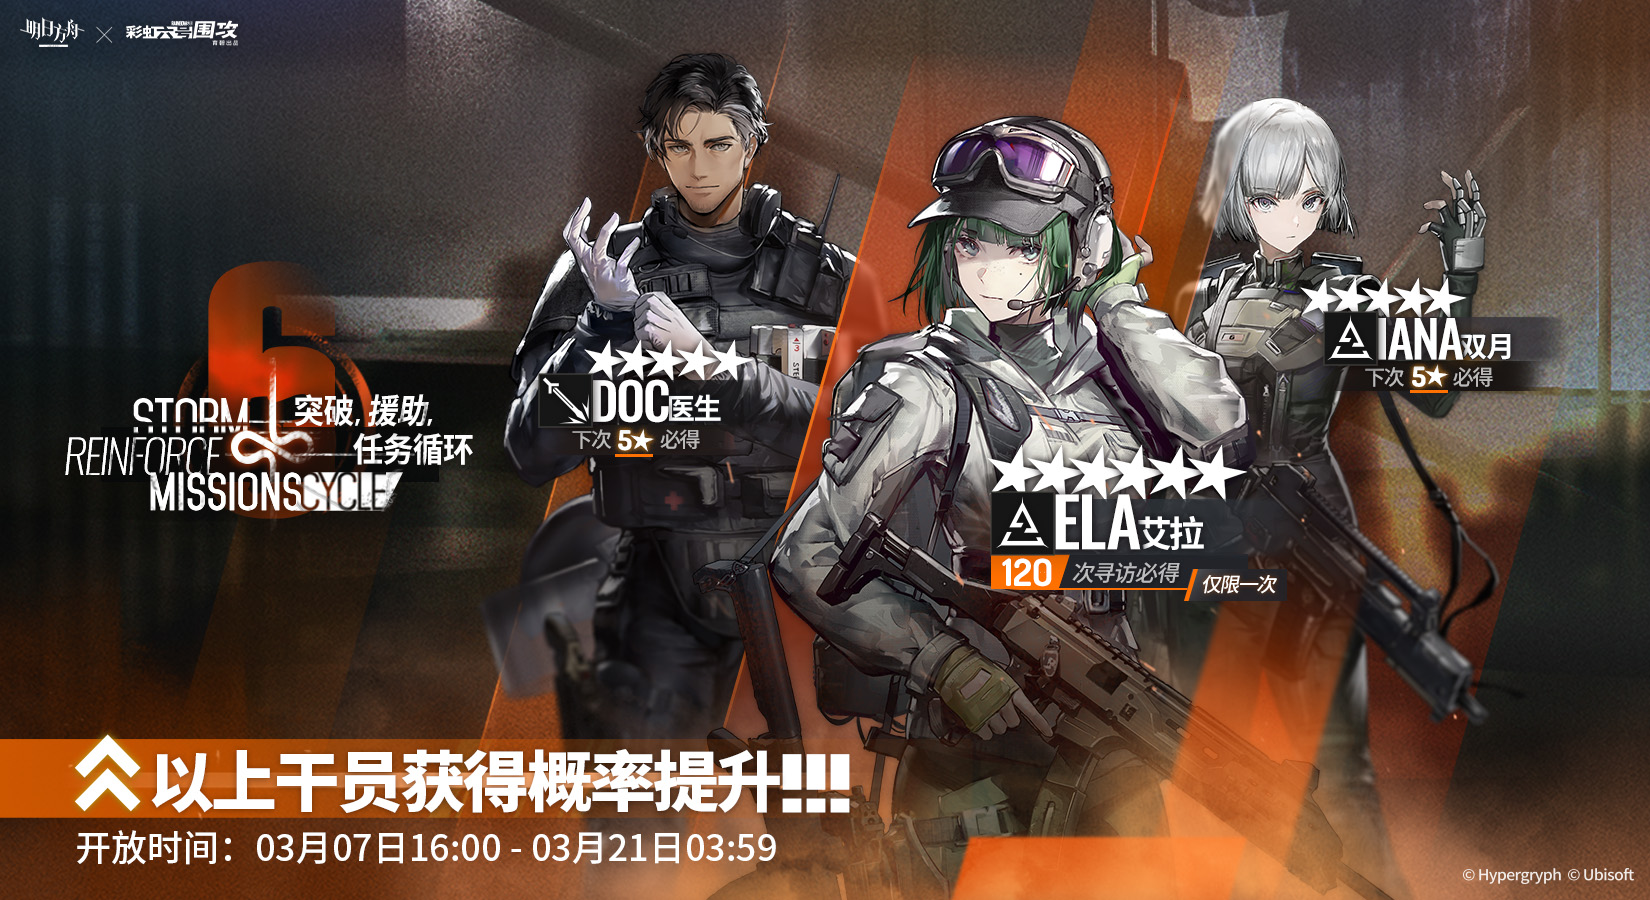 CN Storm, Reinforce, Missions Cycle banner.png